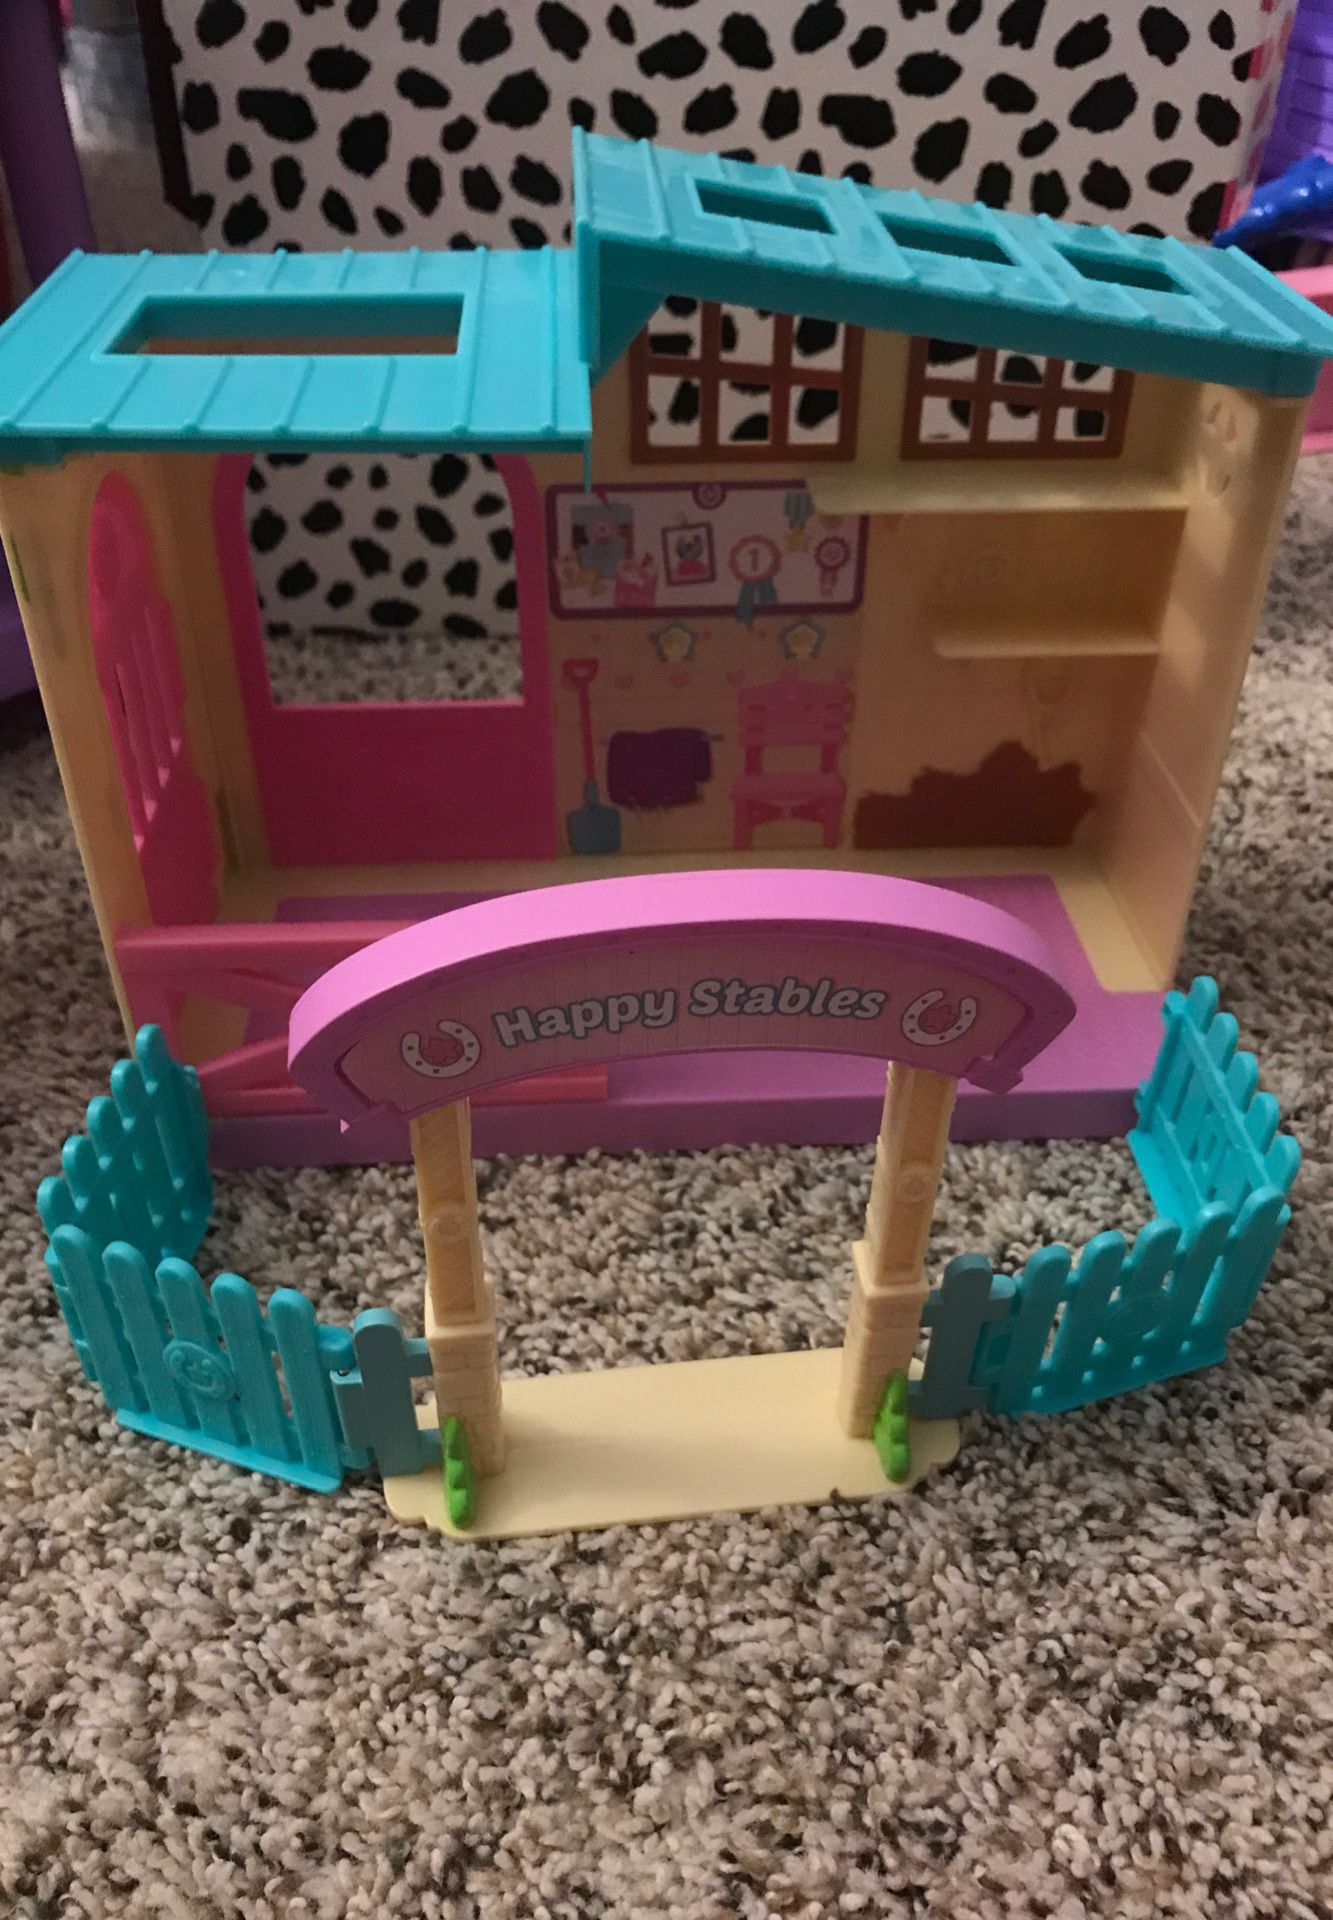 Shopkins happy stables house . In perfect condition.